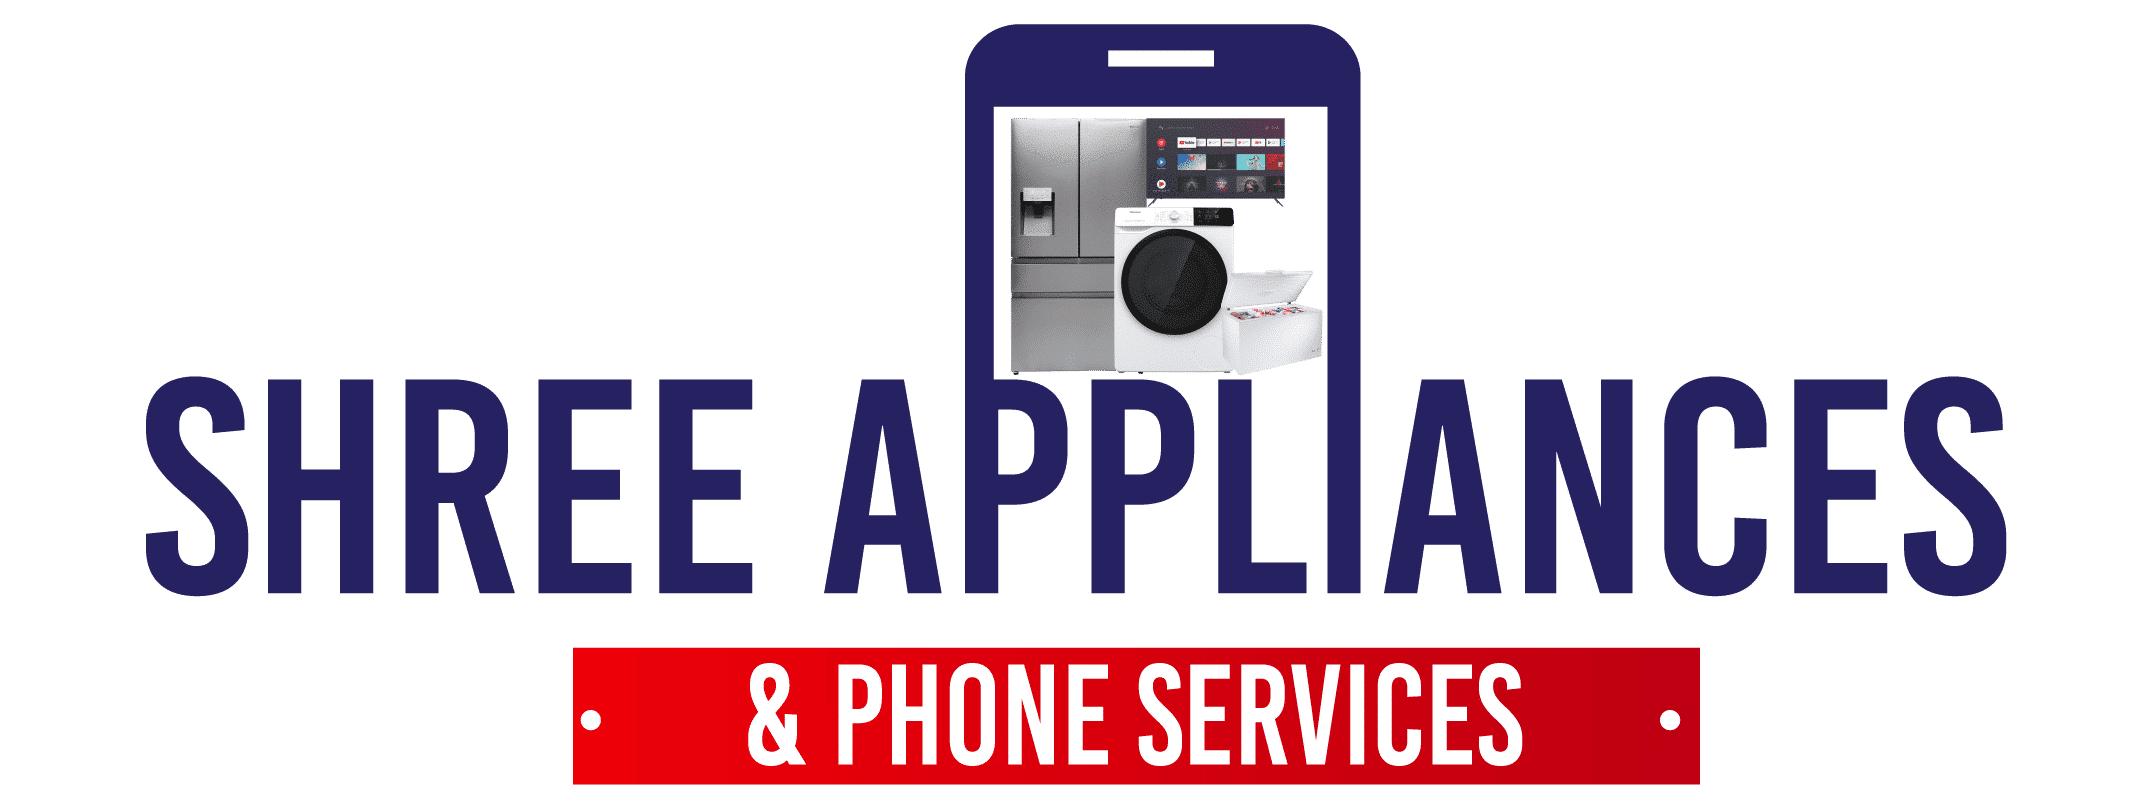 Shree Appliances and Phone Services